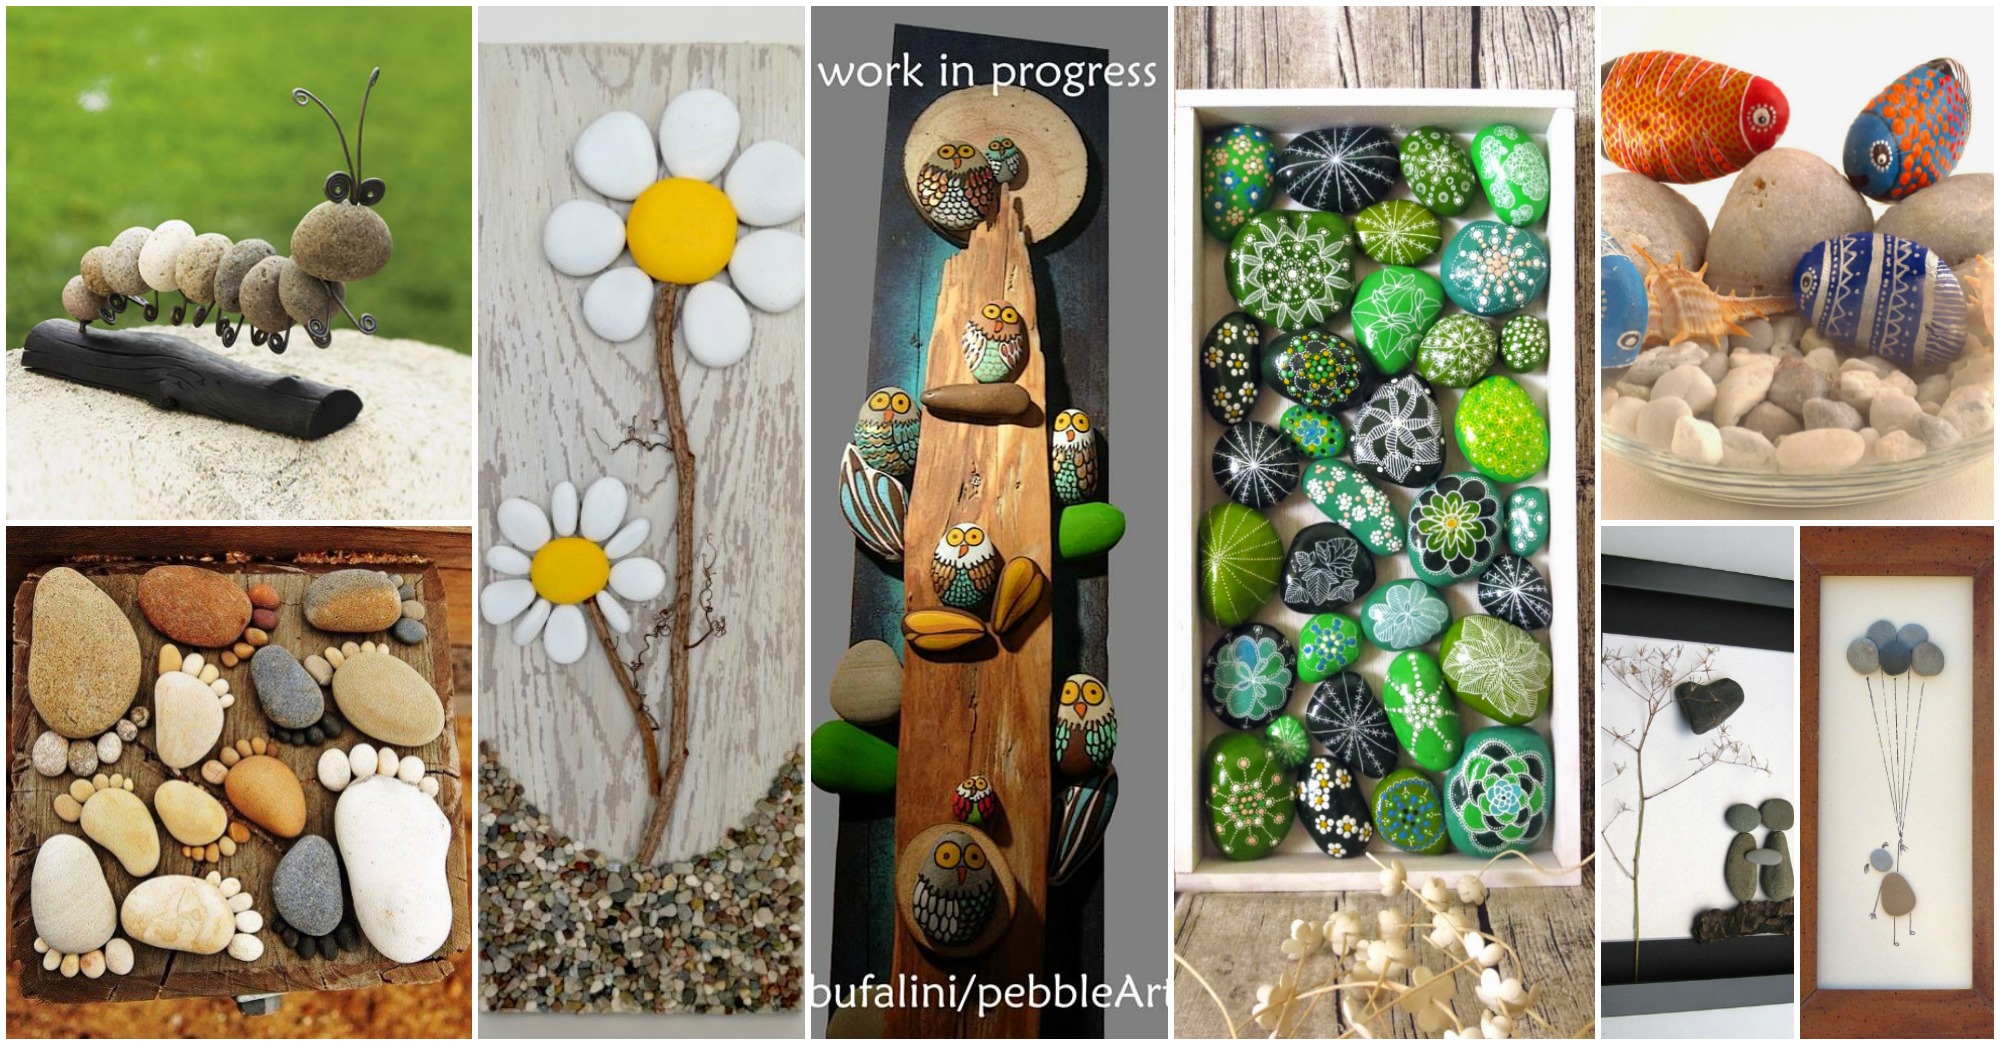 20 Amazing Stone Crafts That Will Boost Your Creativity